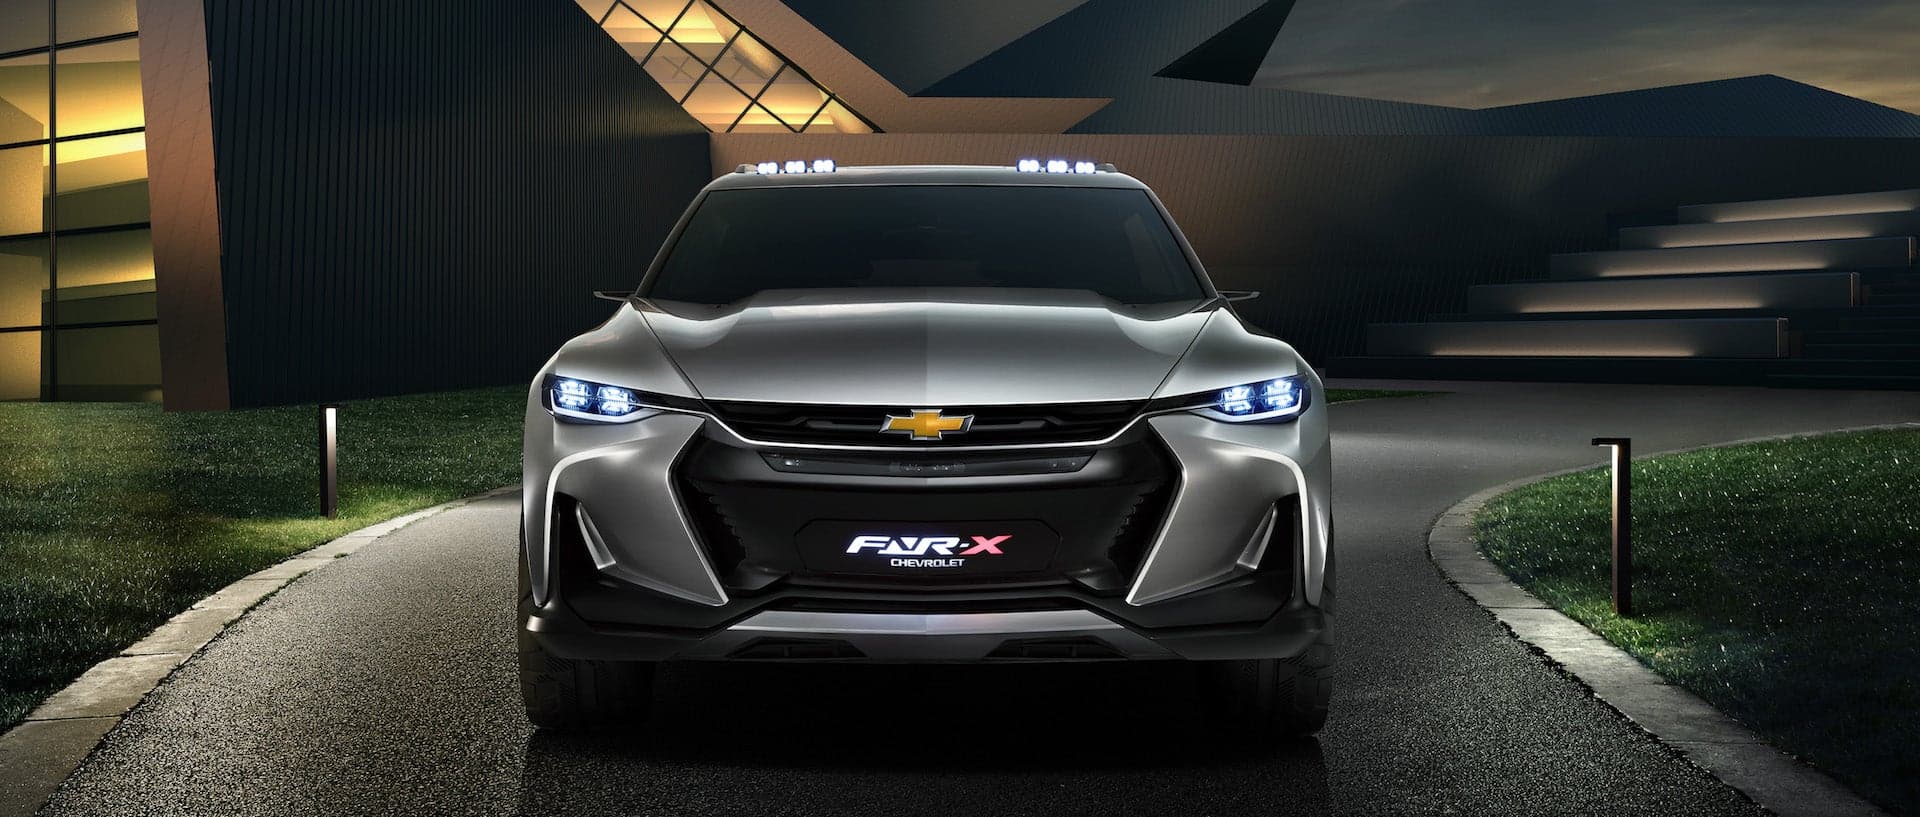 Chevrolet FNR-X Concept Is the Do-All Car of the Future